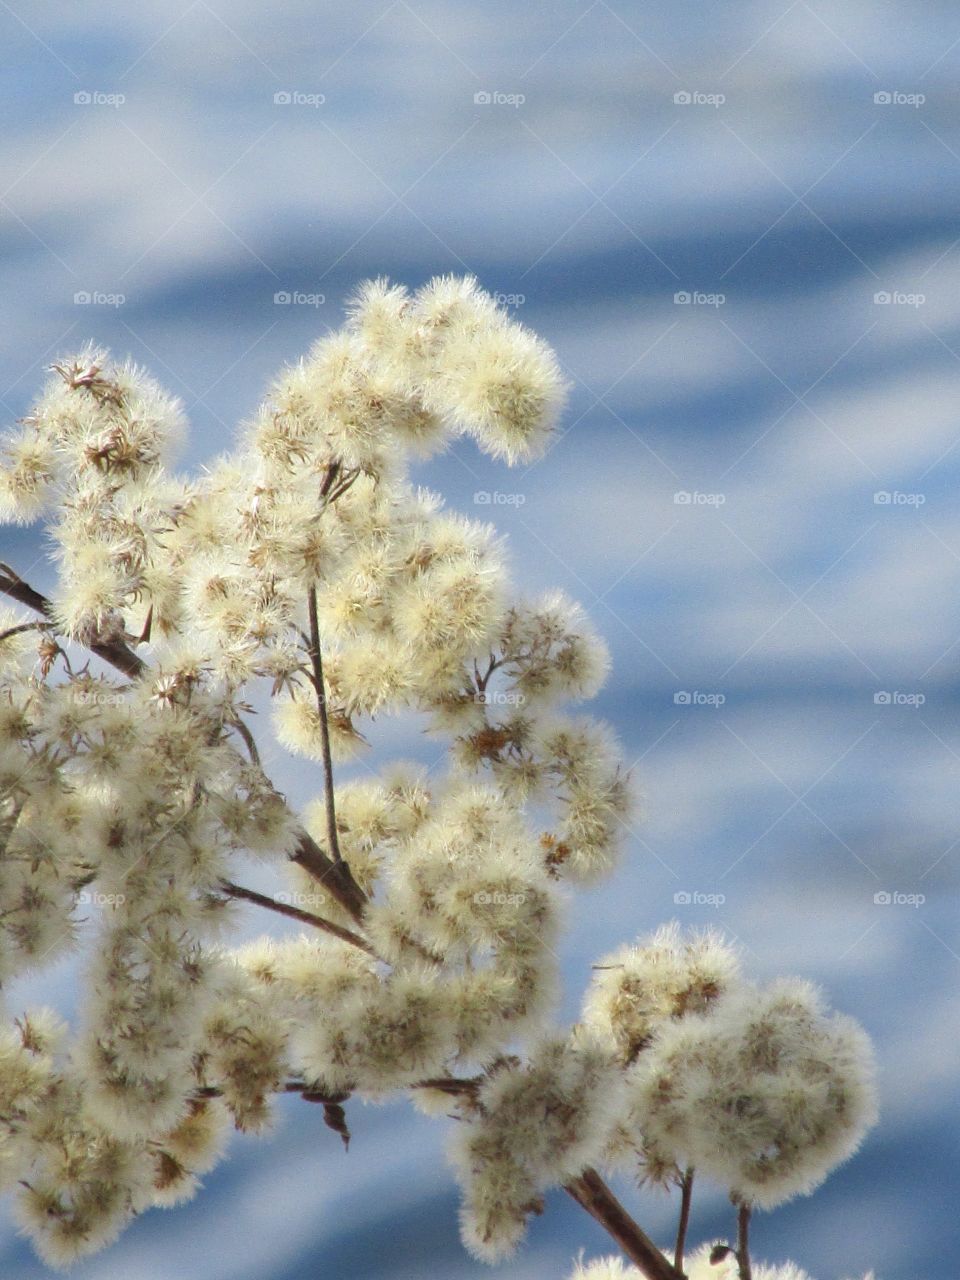 Fuzzy plant by water - Textures of the World Mission